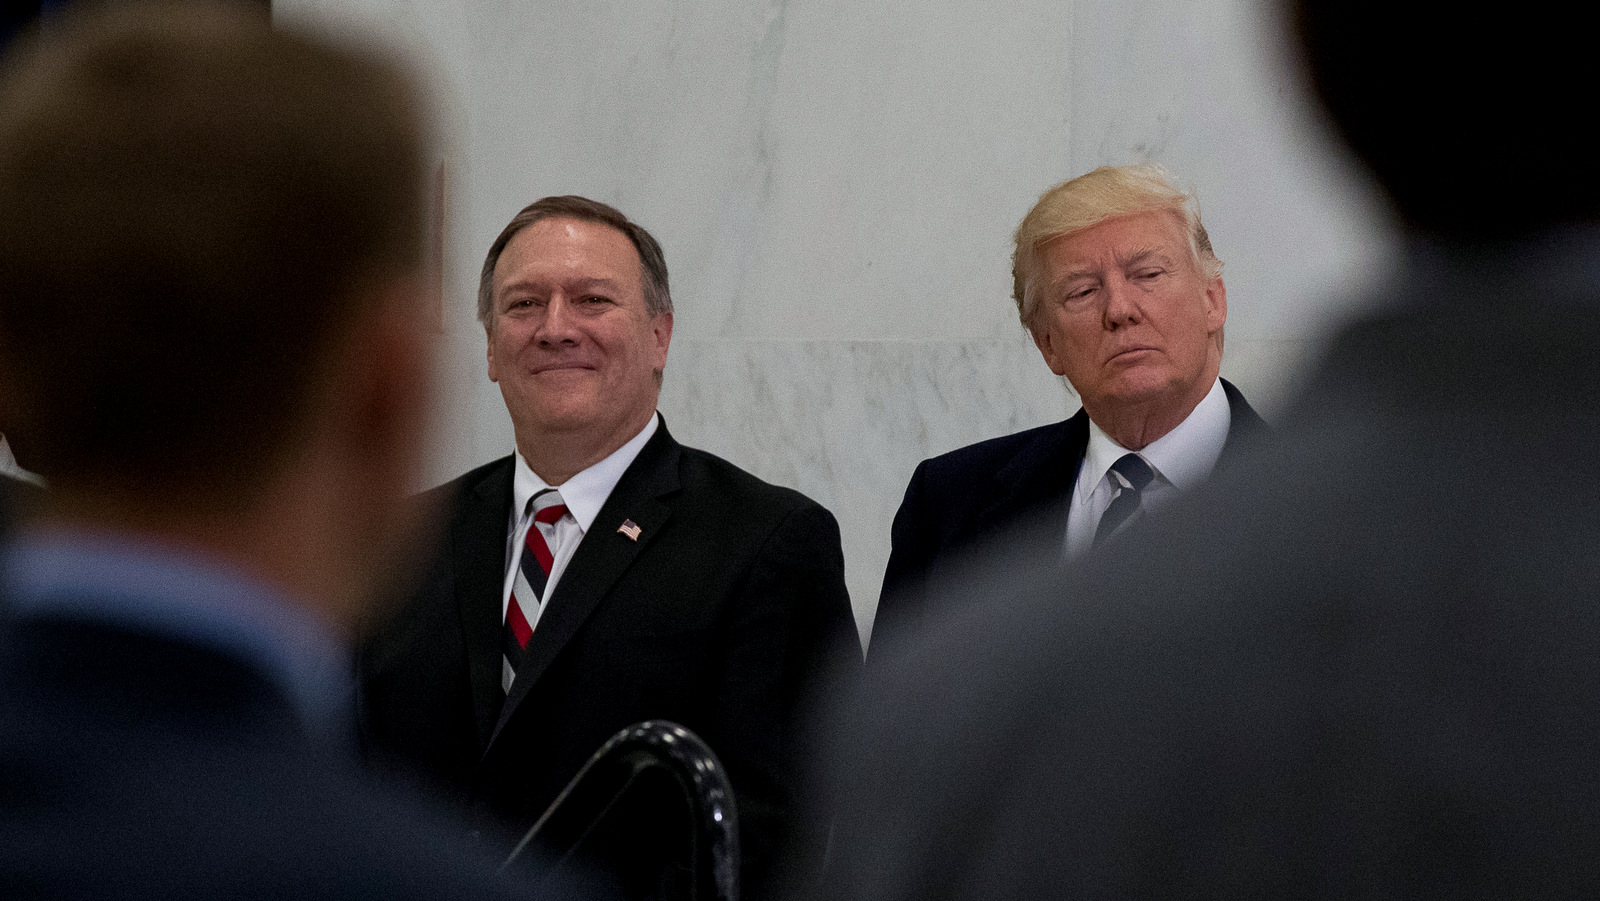 President Donald Trump, accompanied by CIA Director-designate Rep. Michael Pompeo, left, waits to speak at the Central Intelligence Agency in Langley, Va., Saturday, Jan. 21, 2017. (AP/Andrew Harnik)